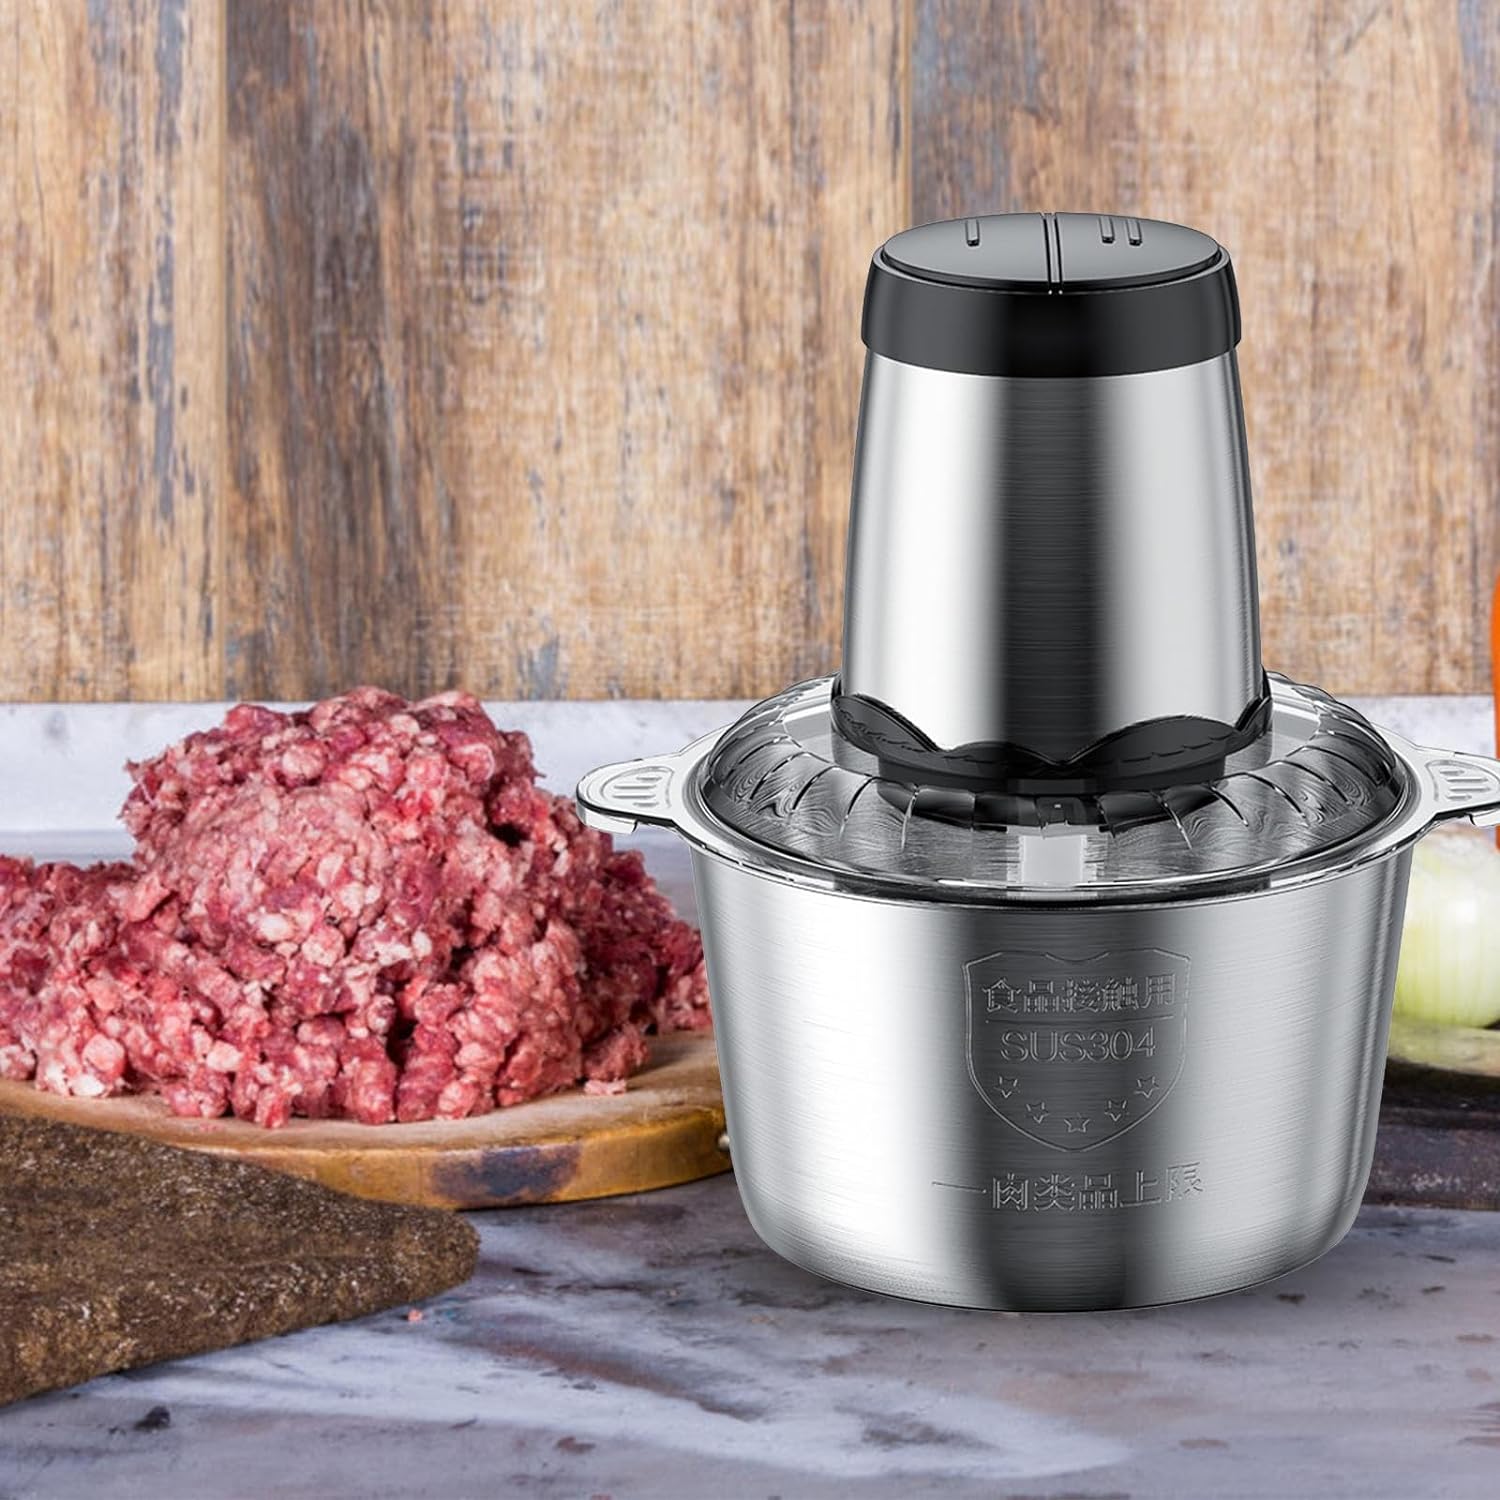 Electric Meat Processor, 2L Stainless Steel Food Processor, 8-Cup Food Chopper with 4 Sharp Blades and Steel Bowl Meat Grinder for Meat, Onion, Vegetables, Fruits, Nuts(250W)